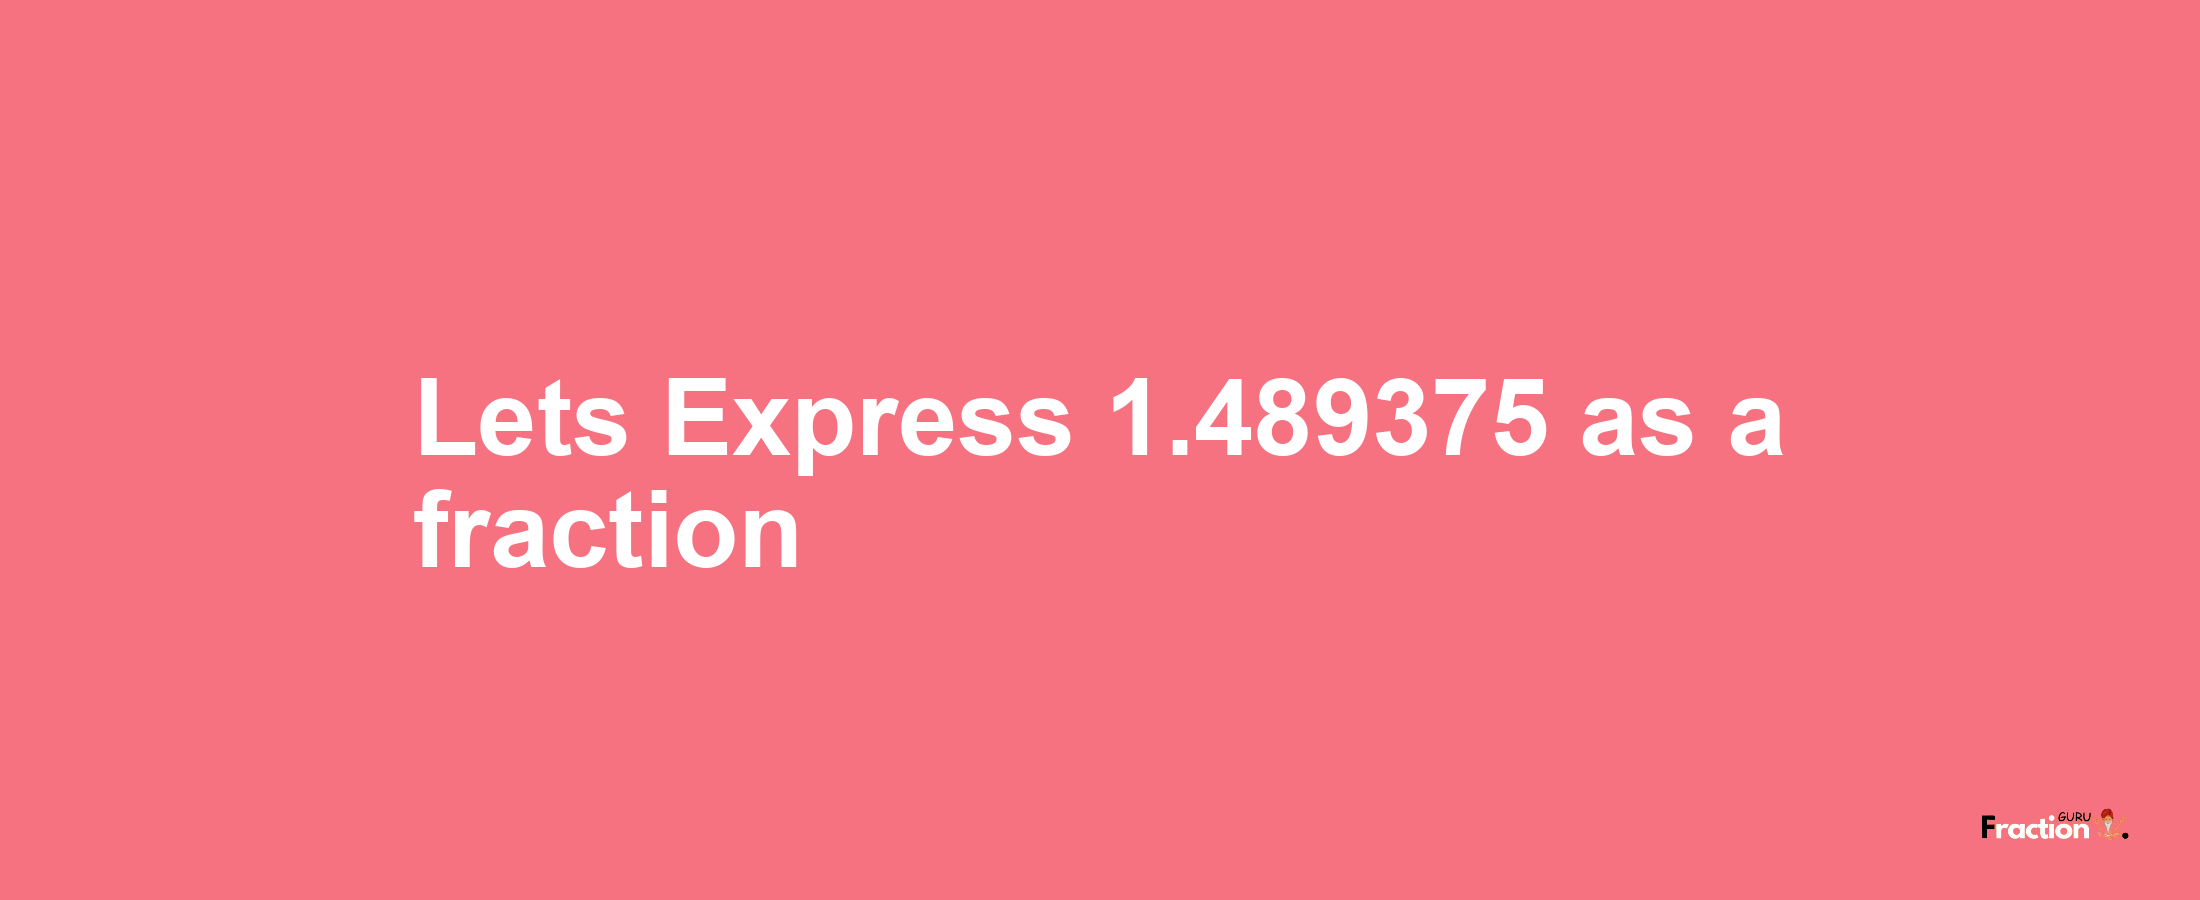 Lets Express 1.489375 as afraction